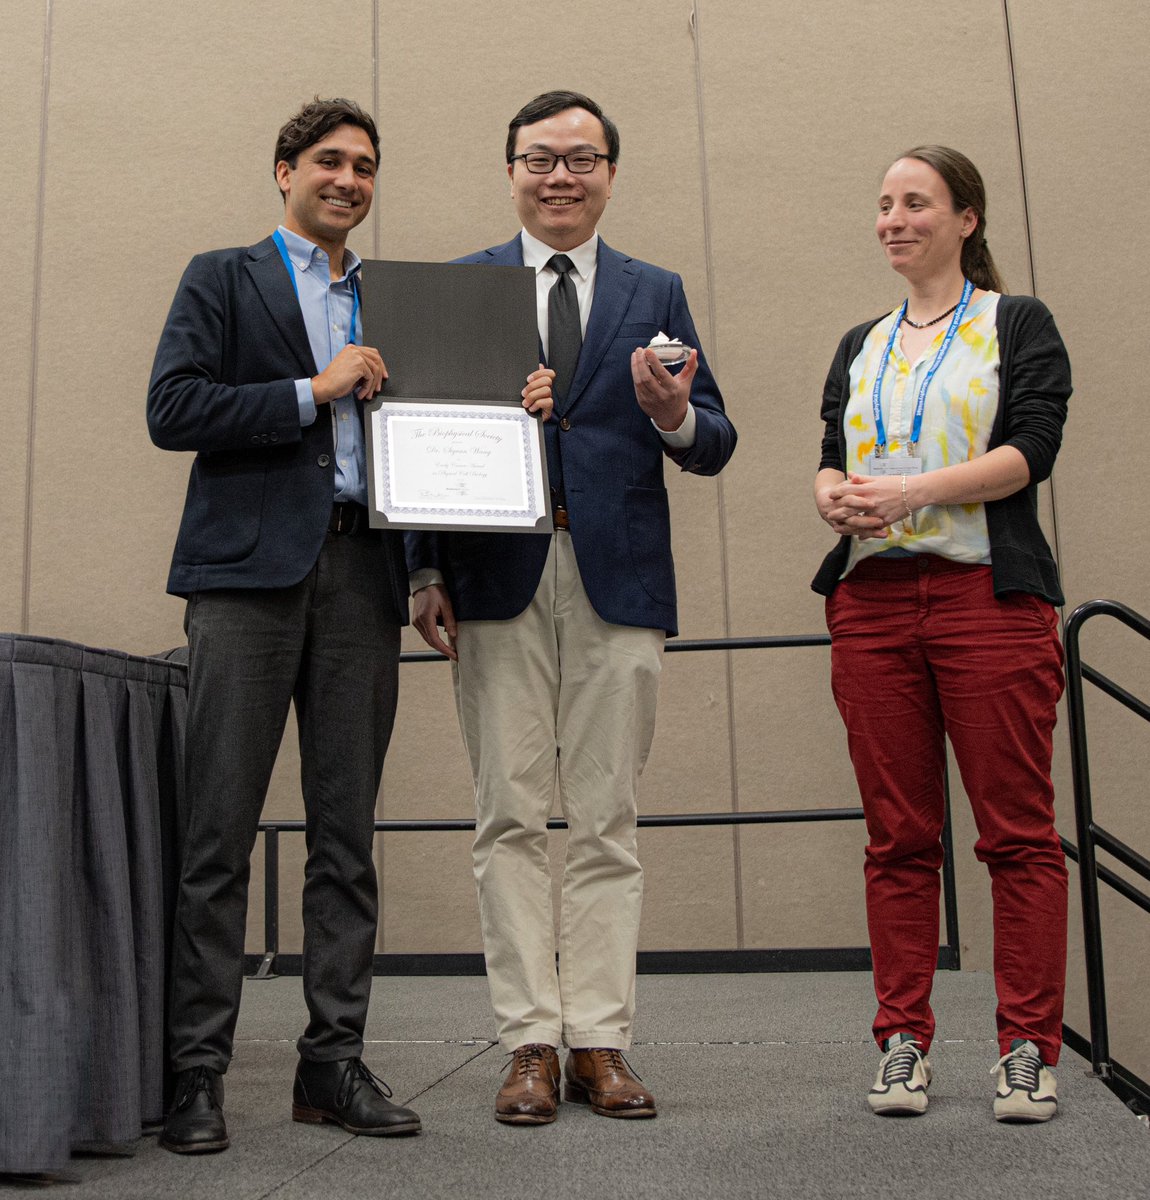 Honored and humbled to receive the Physical Cell Biology Early Career Award at the Biophysical Society 2023 Annual Meeting #bps2023. Thank you the physical cell biology award committee for the great recognition of our work! @YaleGenetics @YaleCellBio @YaleMed